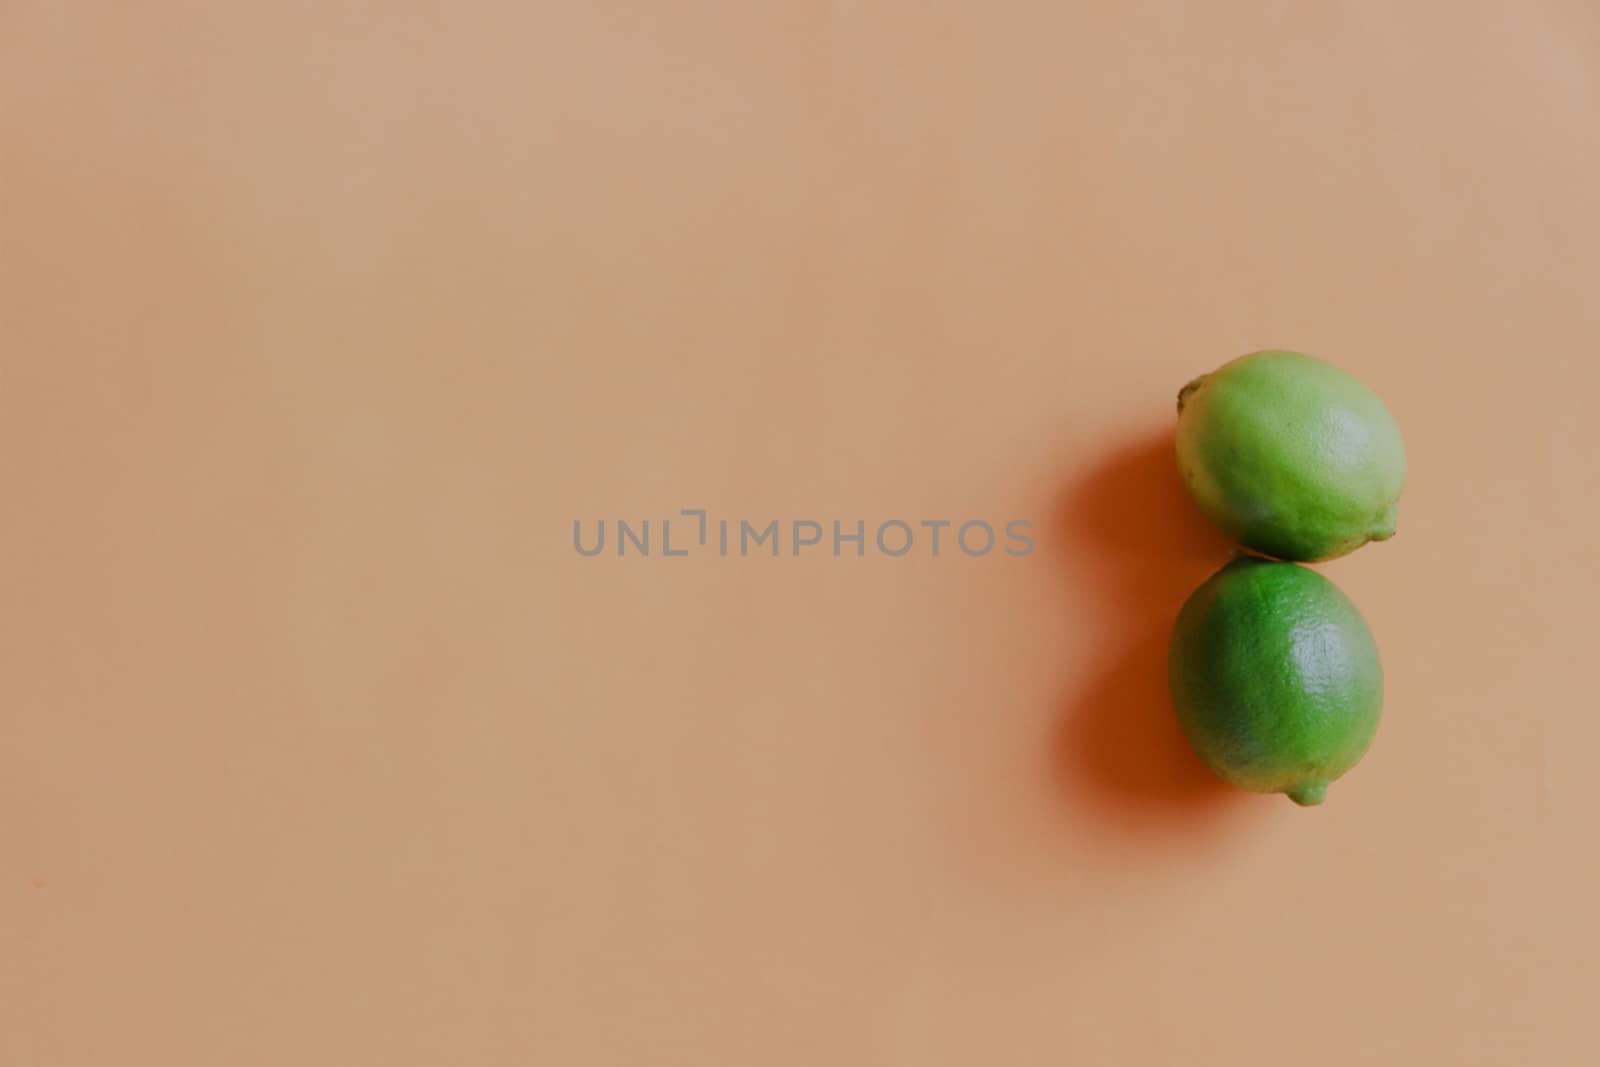 Two Green Limes on Pastel Colored Background by Sonnet15